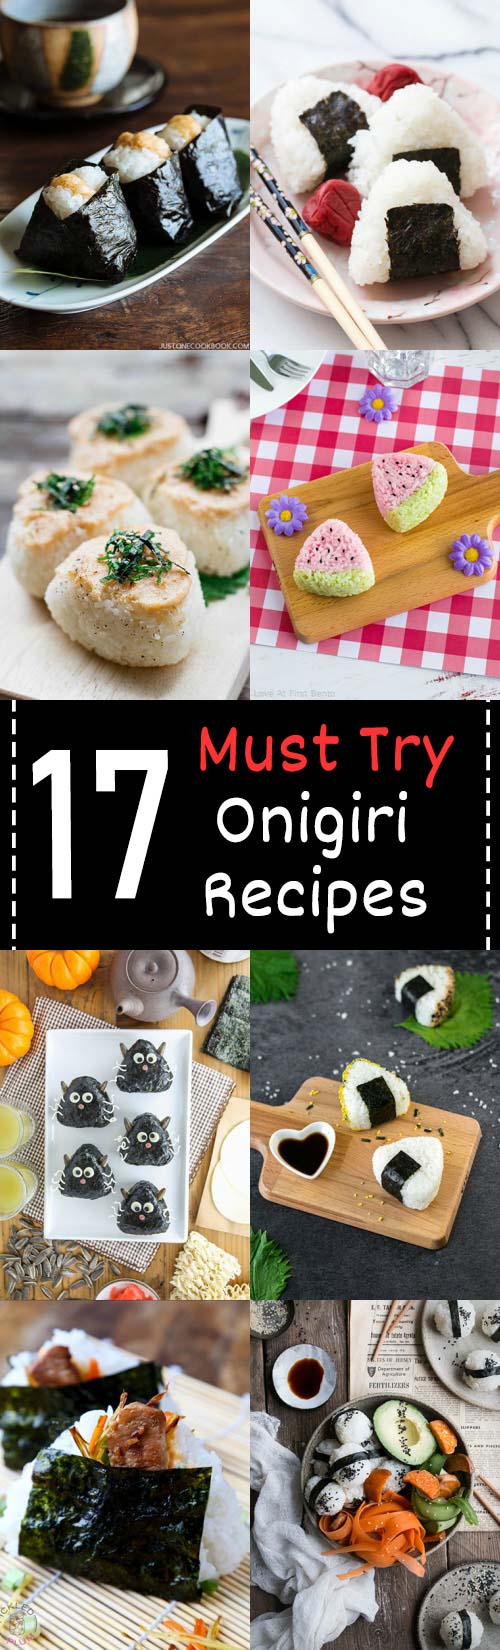 17 Must Try Onigiri Recipes - Featuring traditional onigiri, ultra cute onigiri, and vegan/vegetarian options, this is the ULTIMATE list of onigiri recipes on the internet! With 17 easy, delicious, and unique rice ball recipes to choose from, you'll never run out of ideas for using up leftover rice again! | loveatfirstbento.com {bento box, bento}